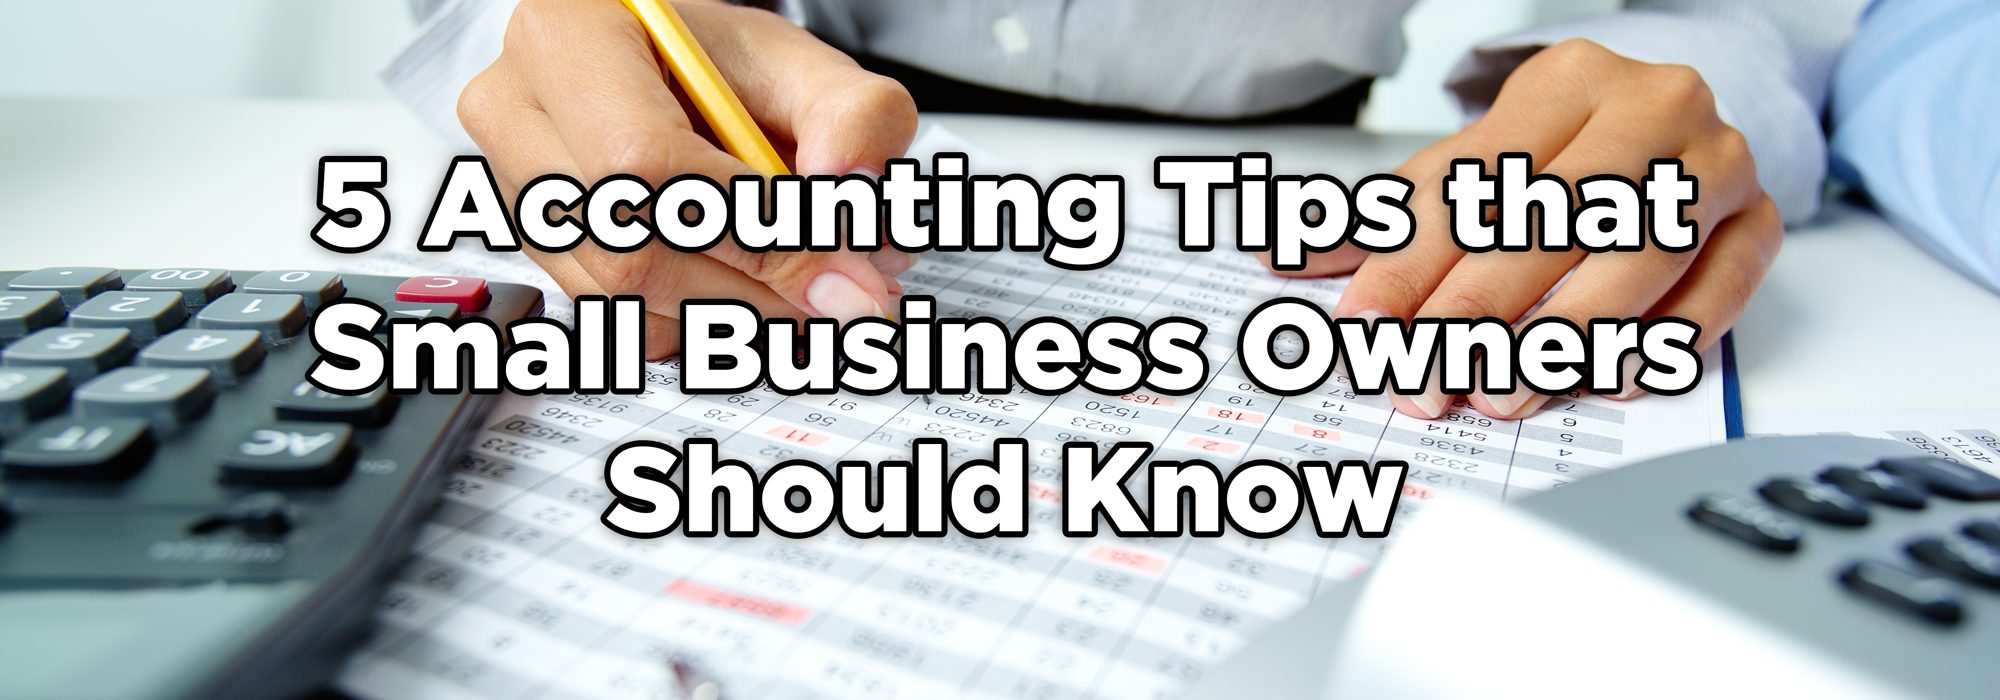 text: 5 accounting tips that small business owners should know. Background graphic - accountants hands working on spreadsheet in front of a keyboard